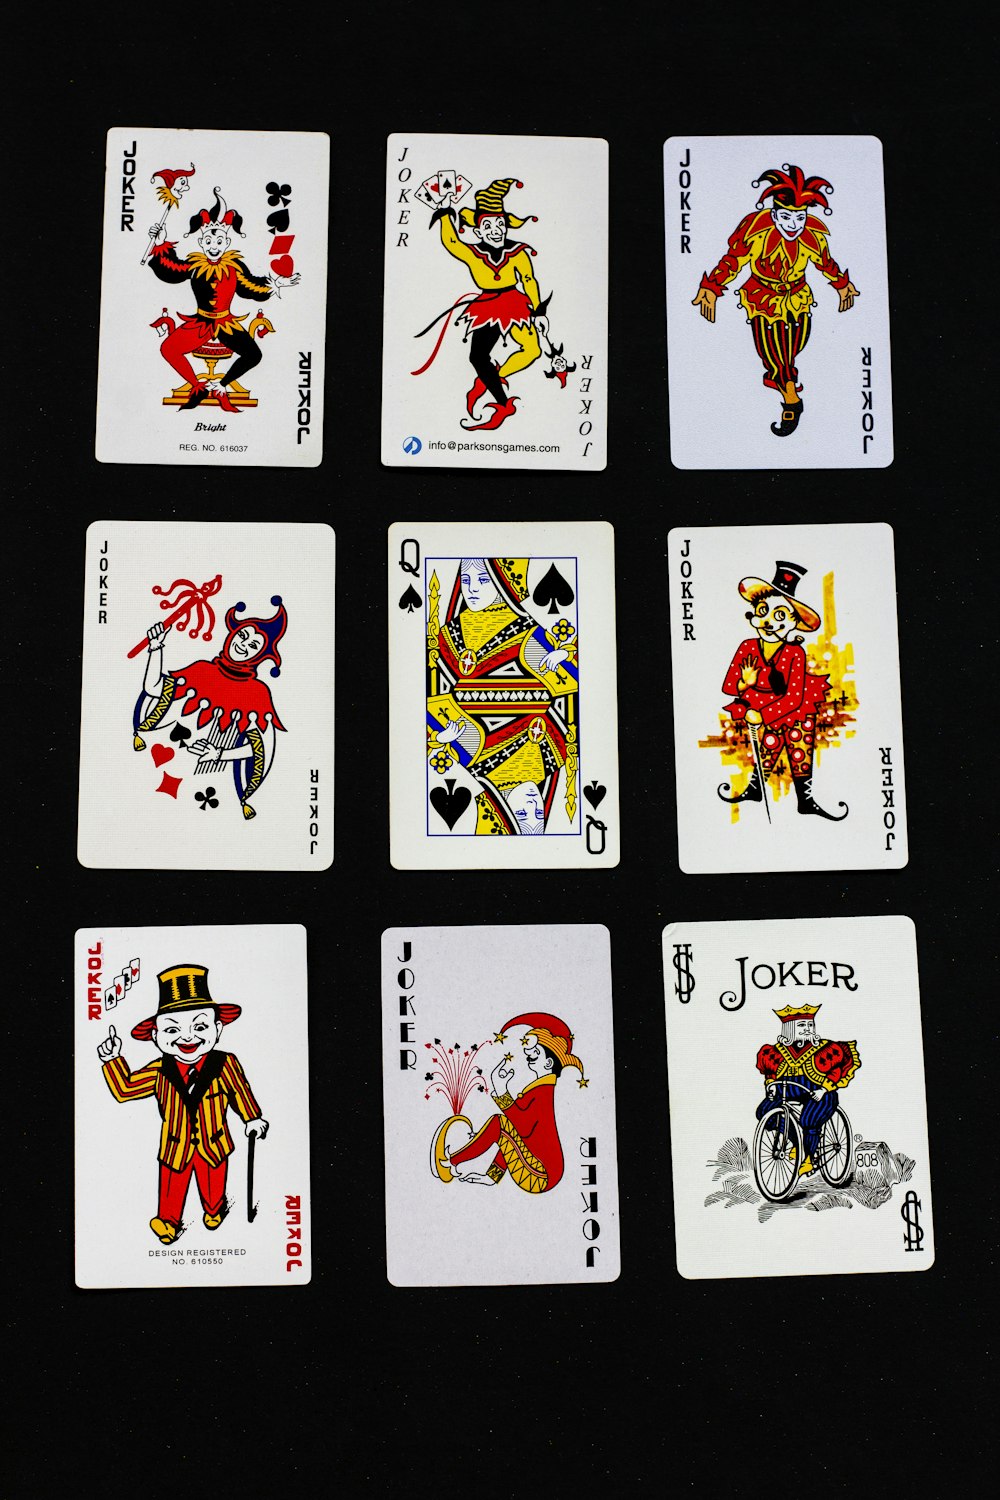 four of a kind of playing cards with different designs